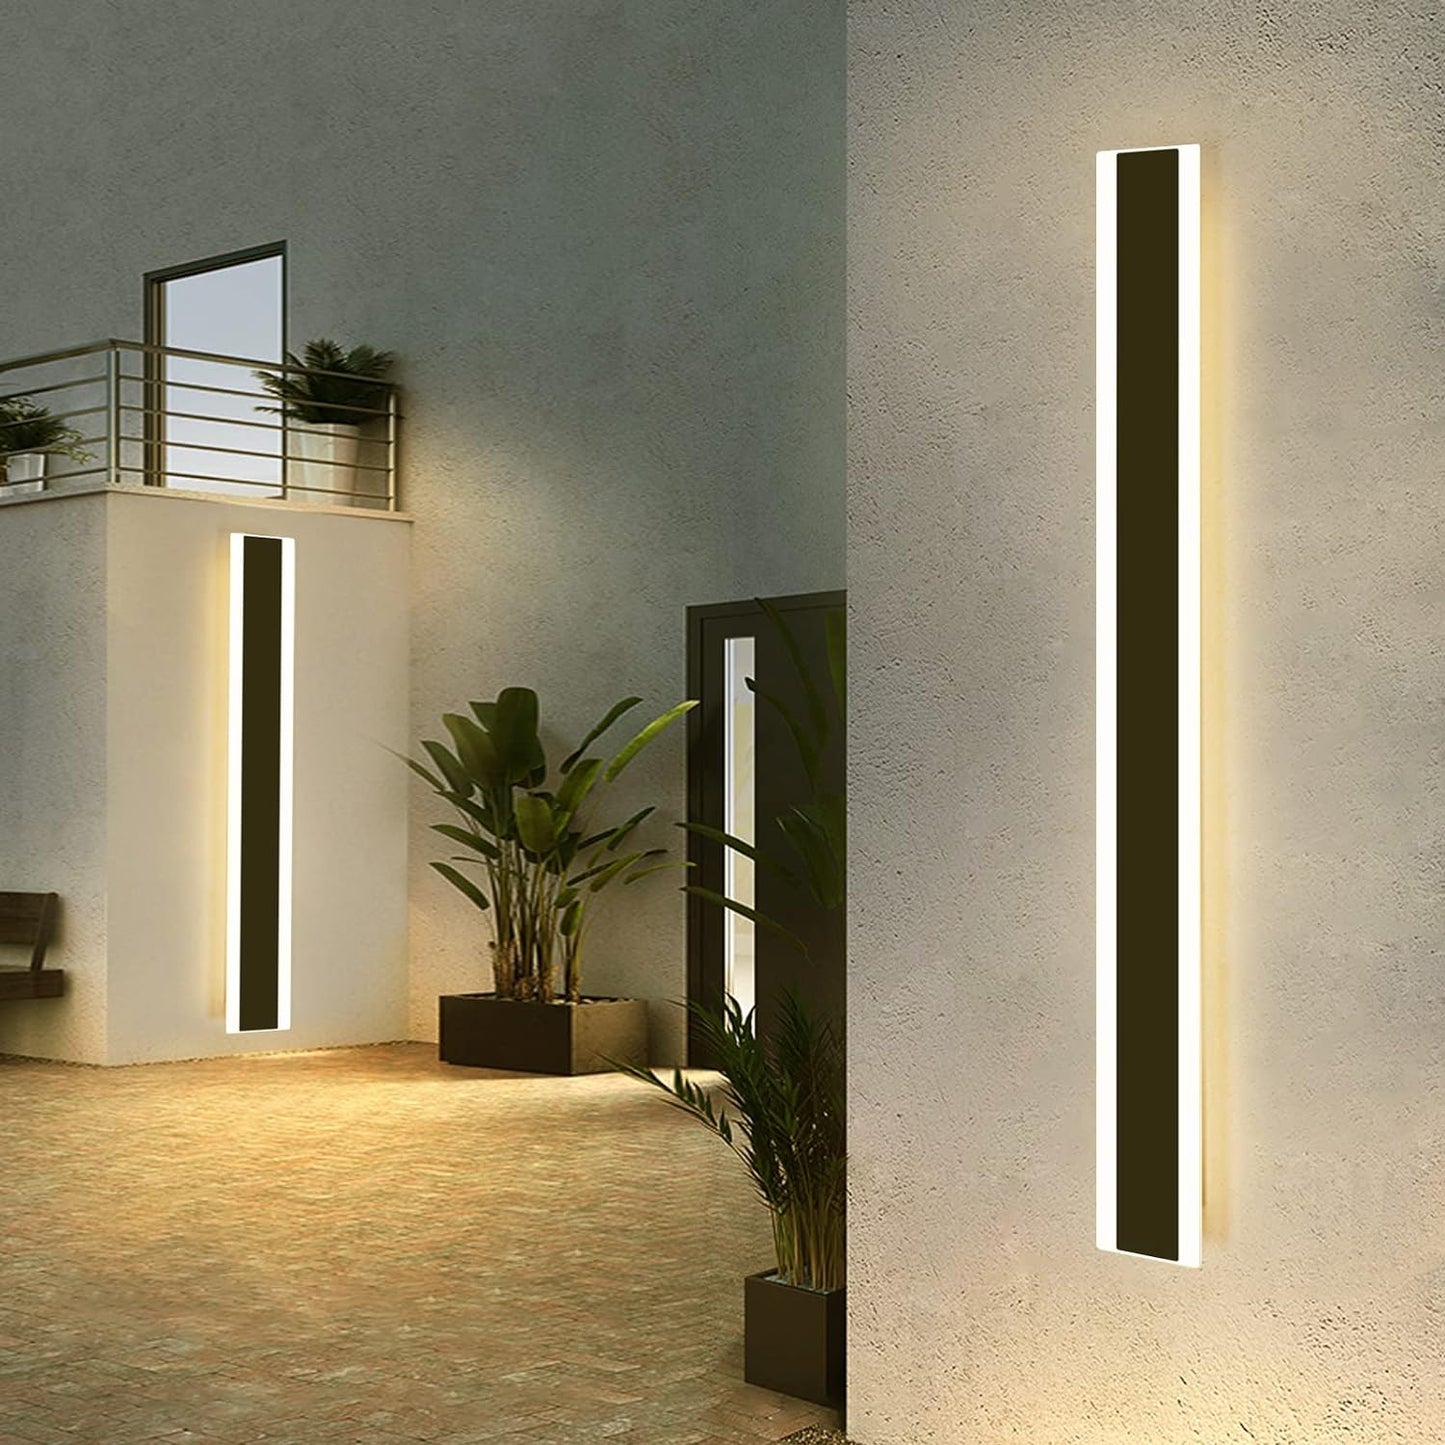 Daoseolo Outdoor Wall Sconces 47Inch, Modern Wall Lamp with Warm Lights, Frosted Acrylic Panel with Light Transmittance Greater Than 95%, IP65 Waterproof Minimalist Porch Wall Fixture for Garage - Selzalot